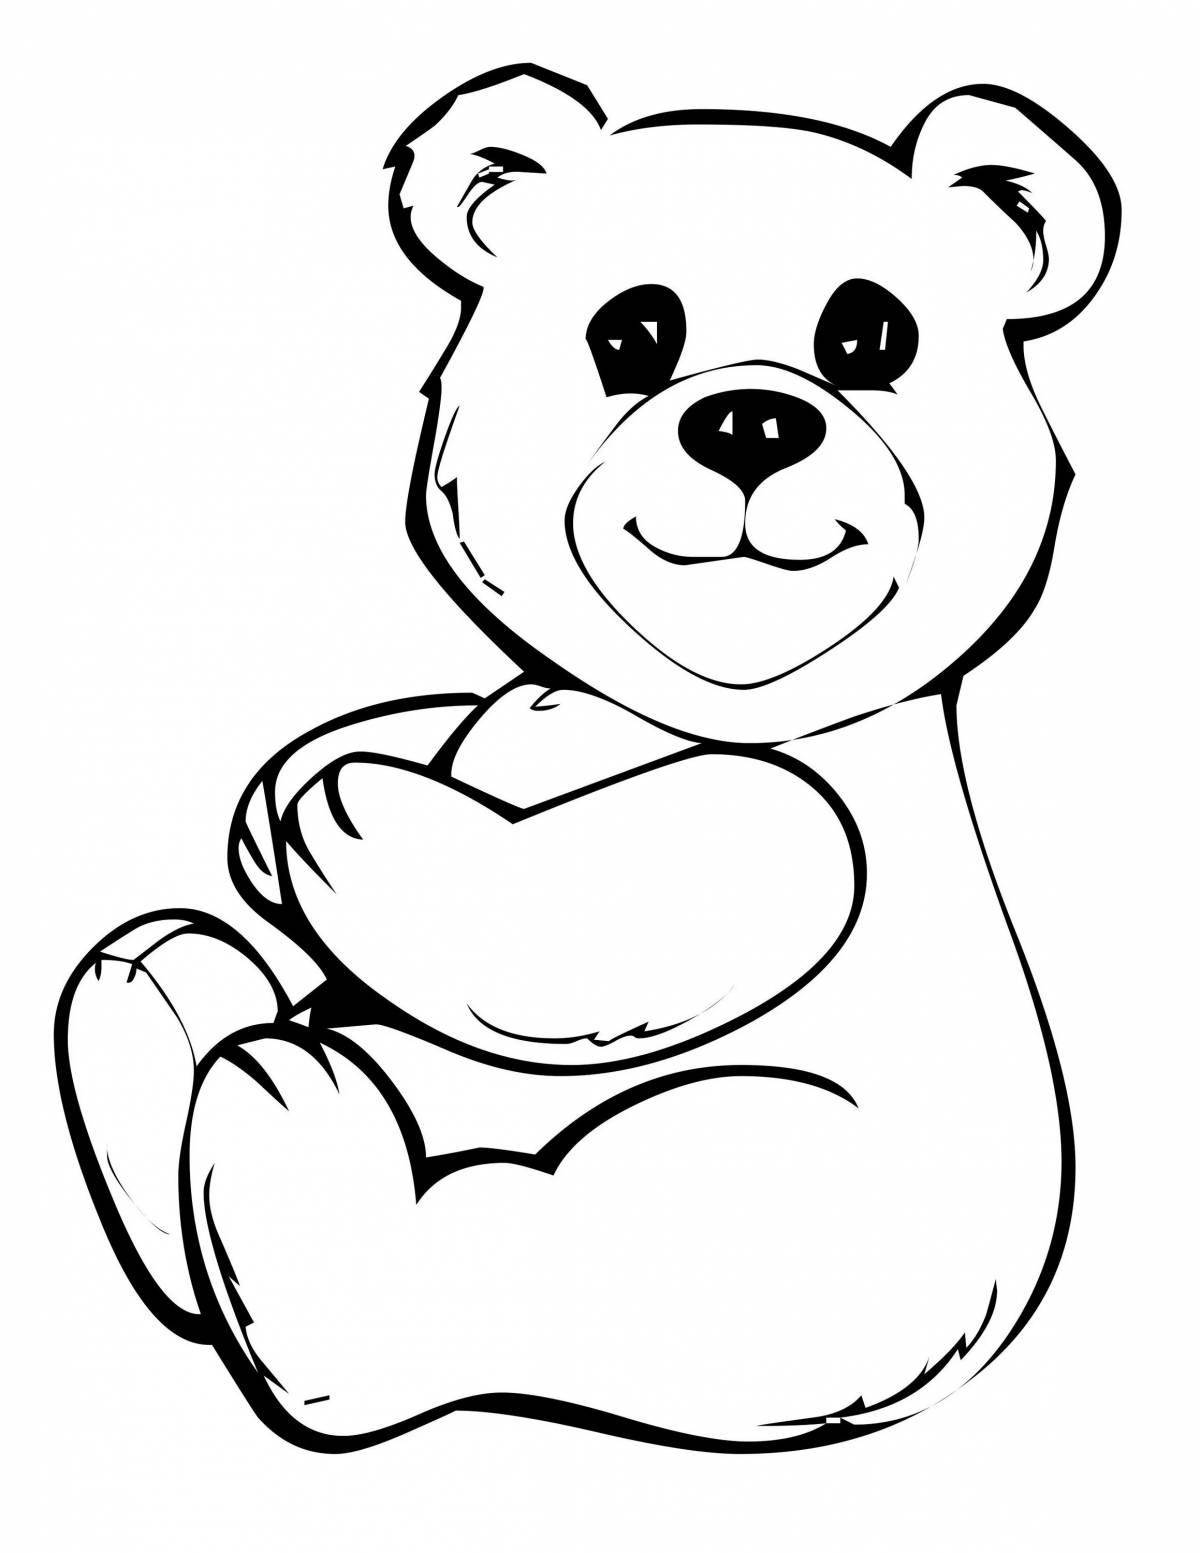 Snuggle teddy bear coloring page